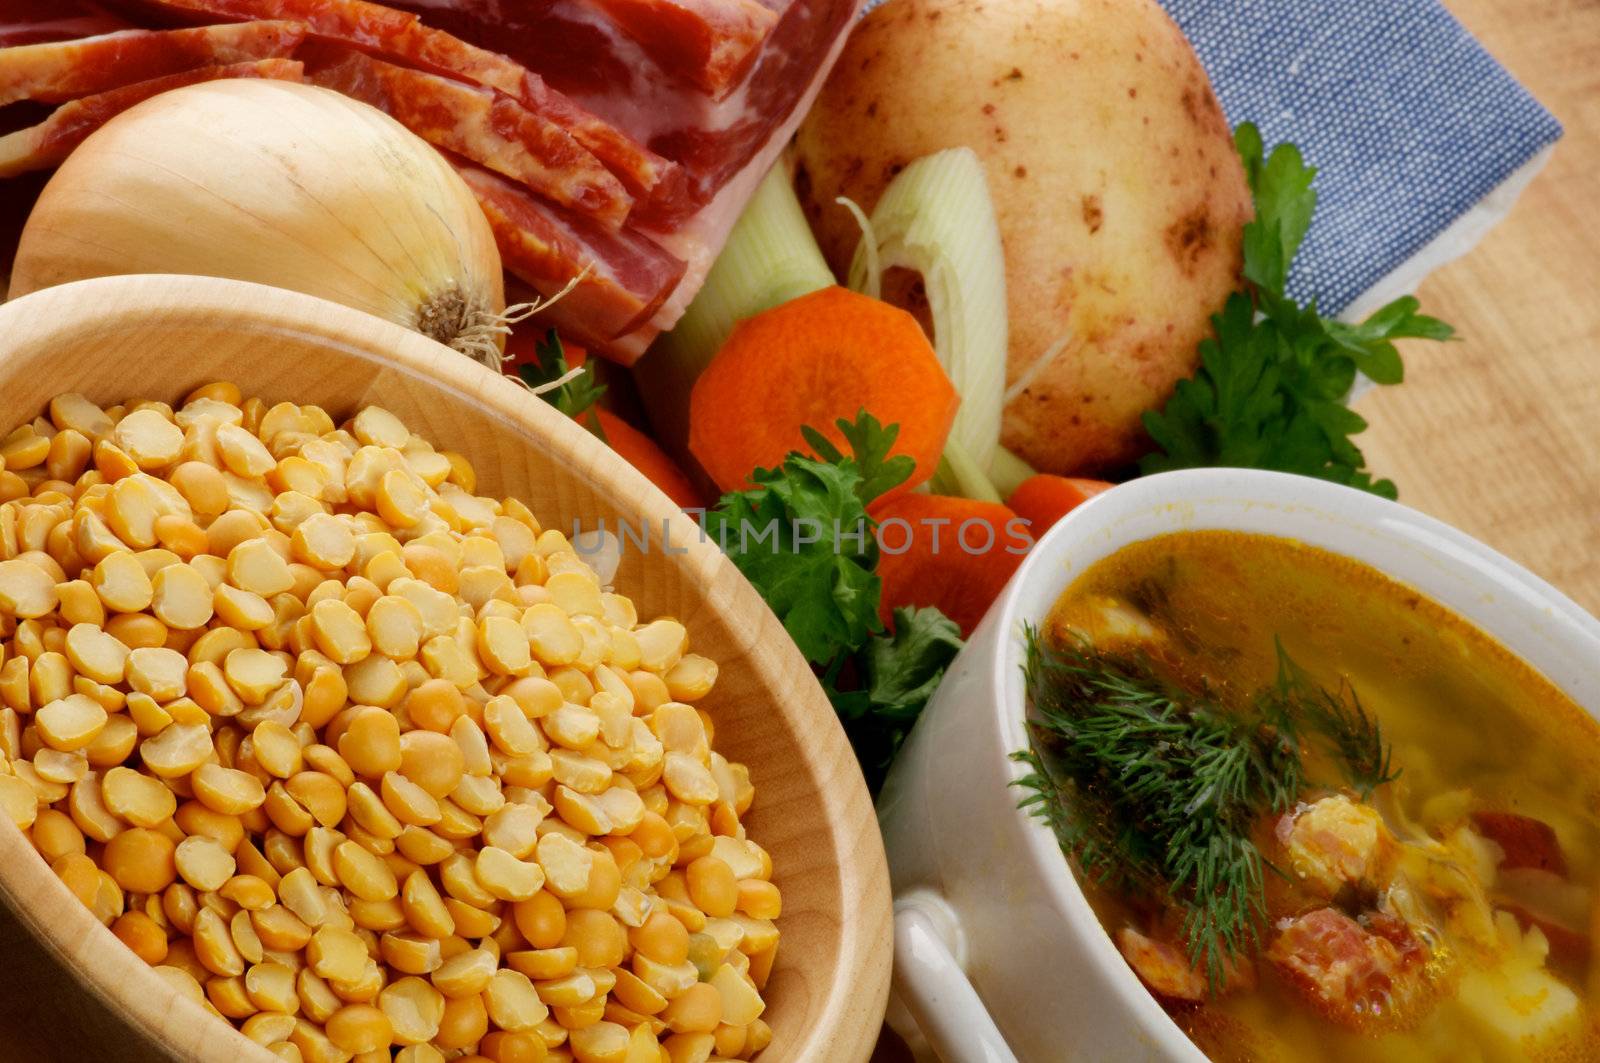 Pea Soup and Ingredients with Yellow Pea, Potato, Carrot, Leek, Onion, Parsley and Smoked Ham closeup